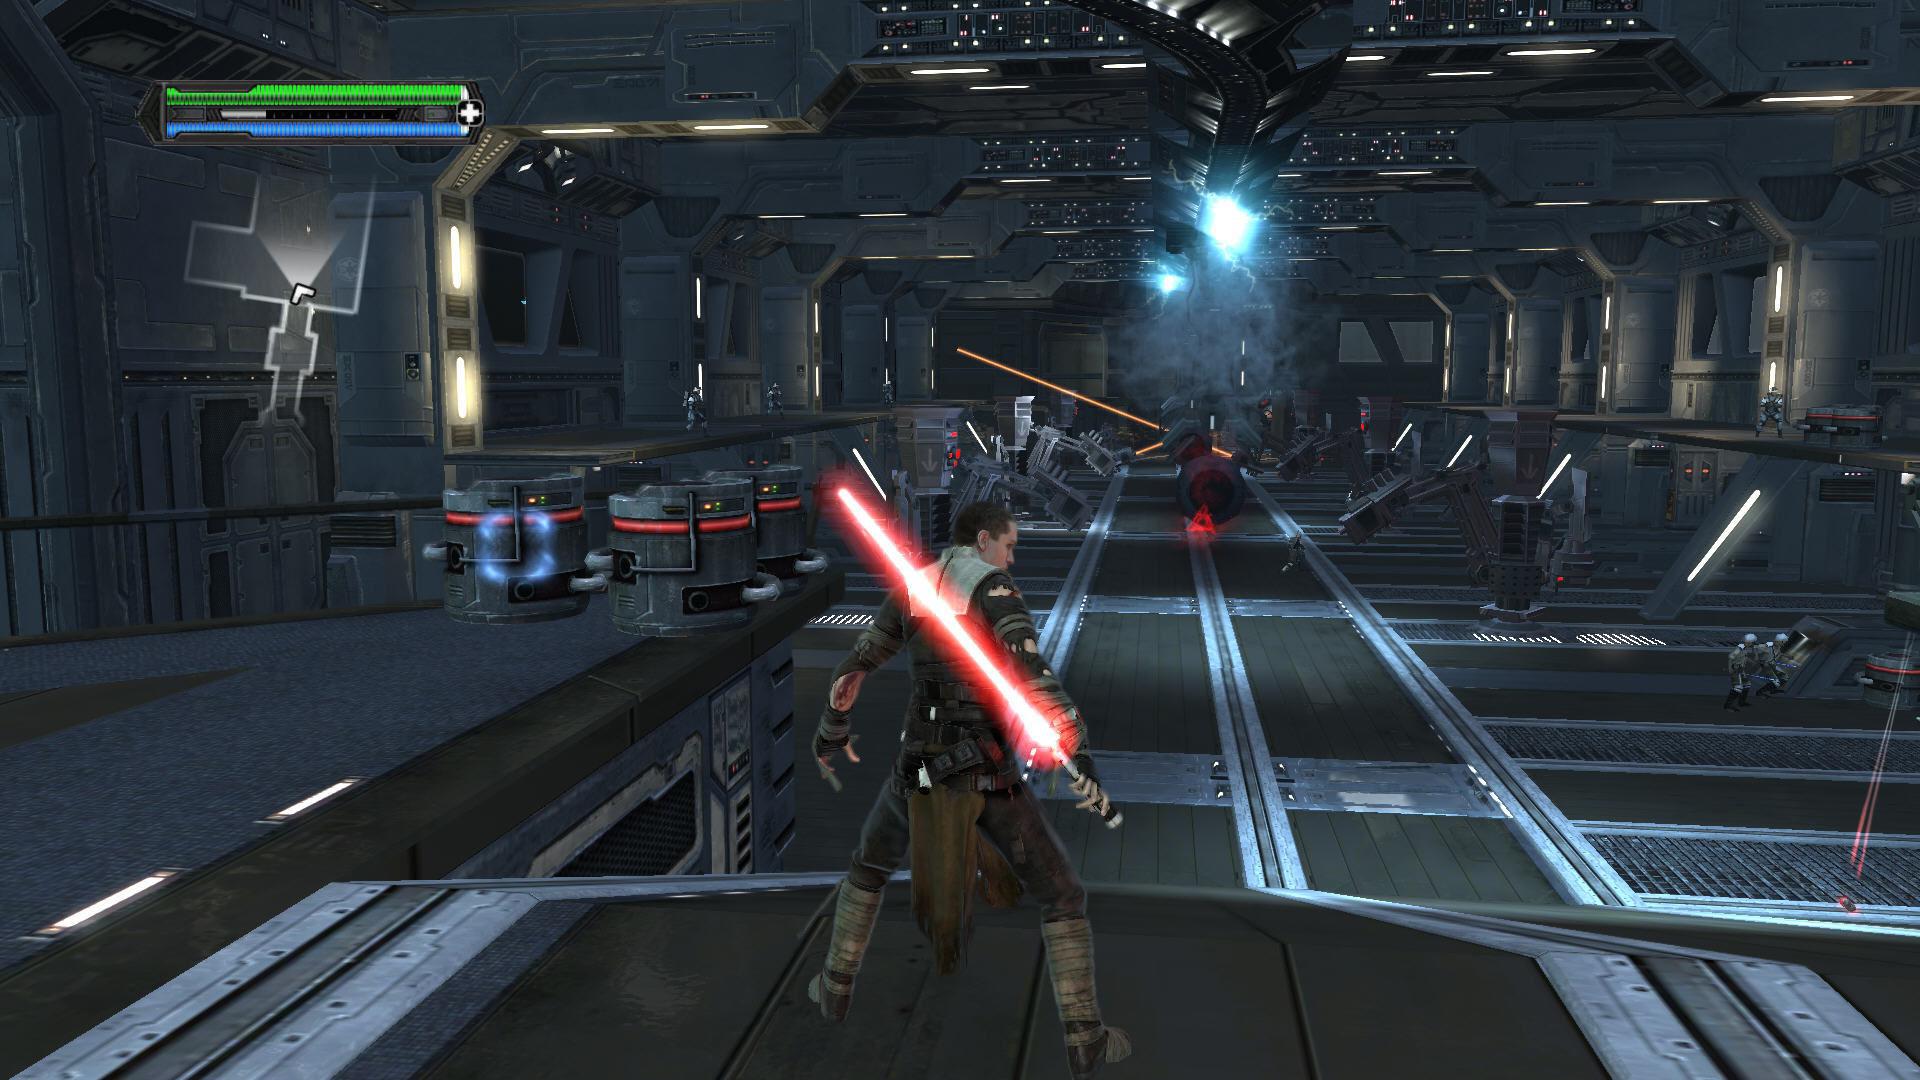 Star wars игры на русском. Игра Star Wars unleashed 3. Стар ВАРС the Force unleashed 1. Star Wars: the Force unleashed - Ultimate Sith Edition. Star Wars the Force unleashed 2008.